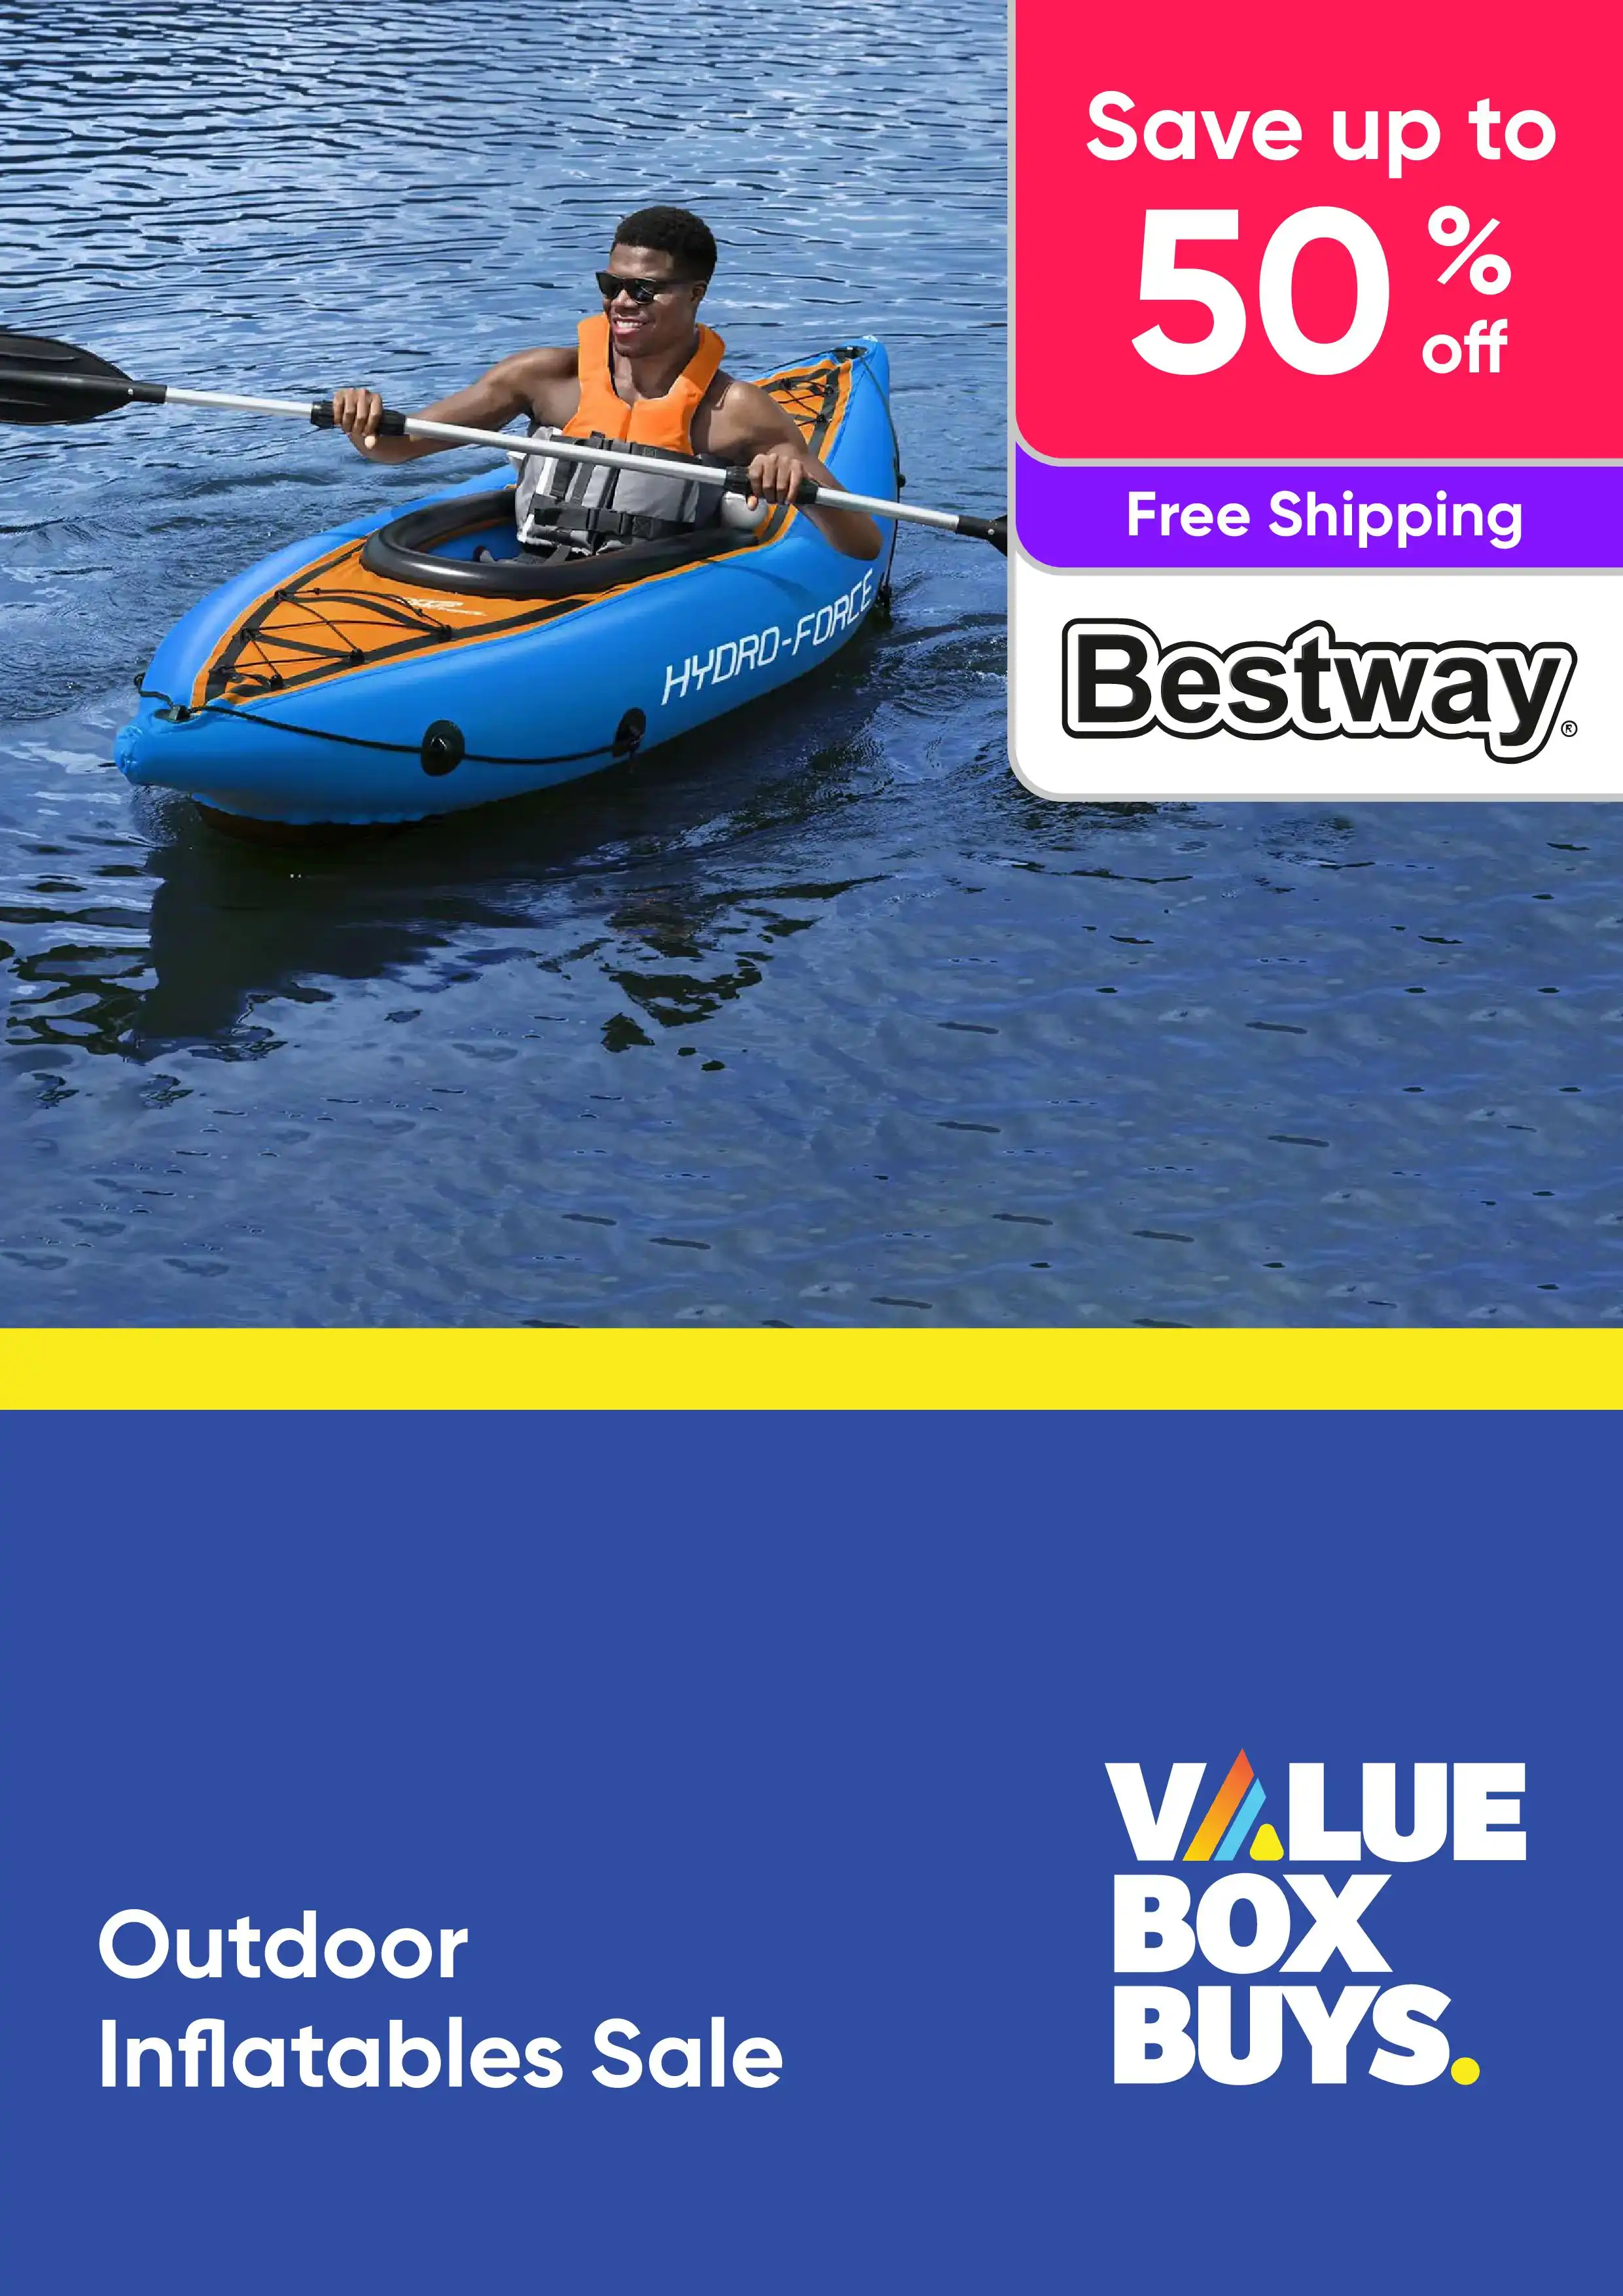 Bestway Outdoor Inflatables Sale - Up to 50% off